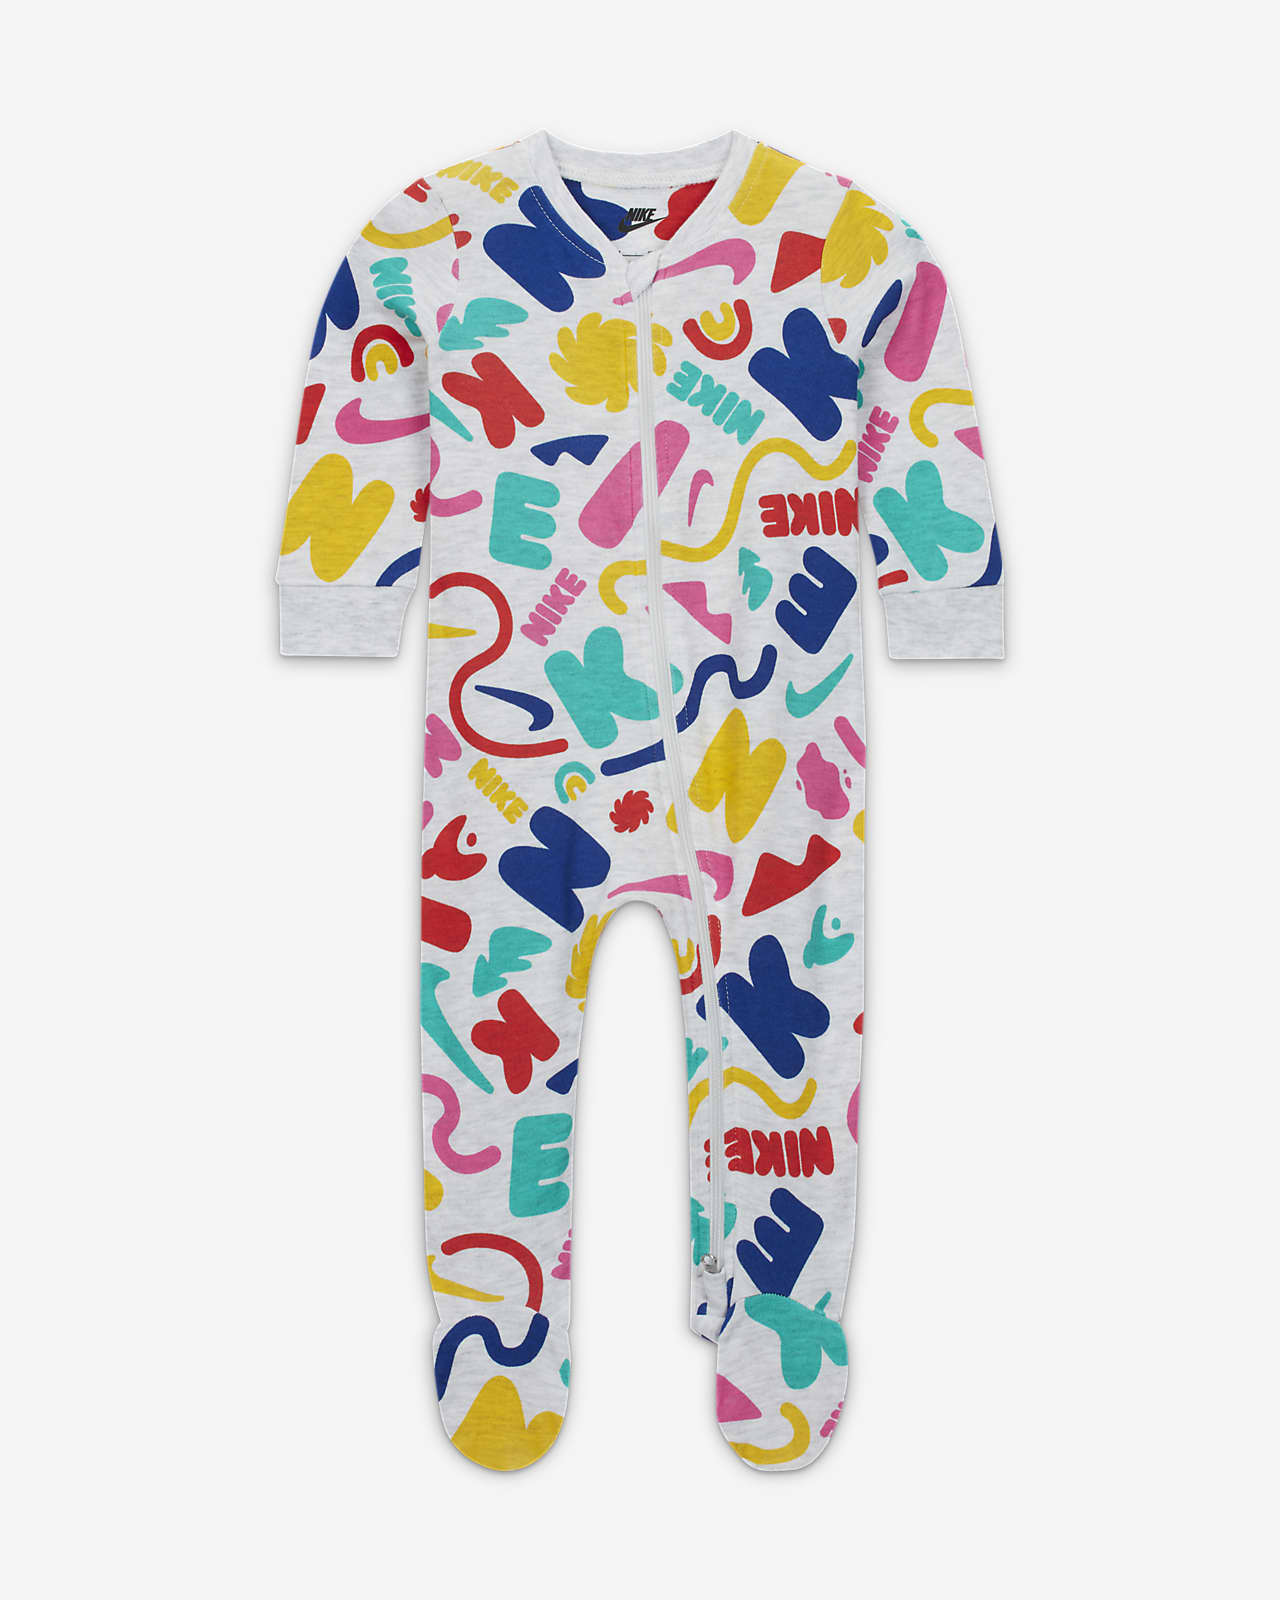 Nike Sportswear Primary Play Footed Coverall Overall für Babys